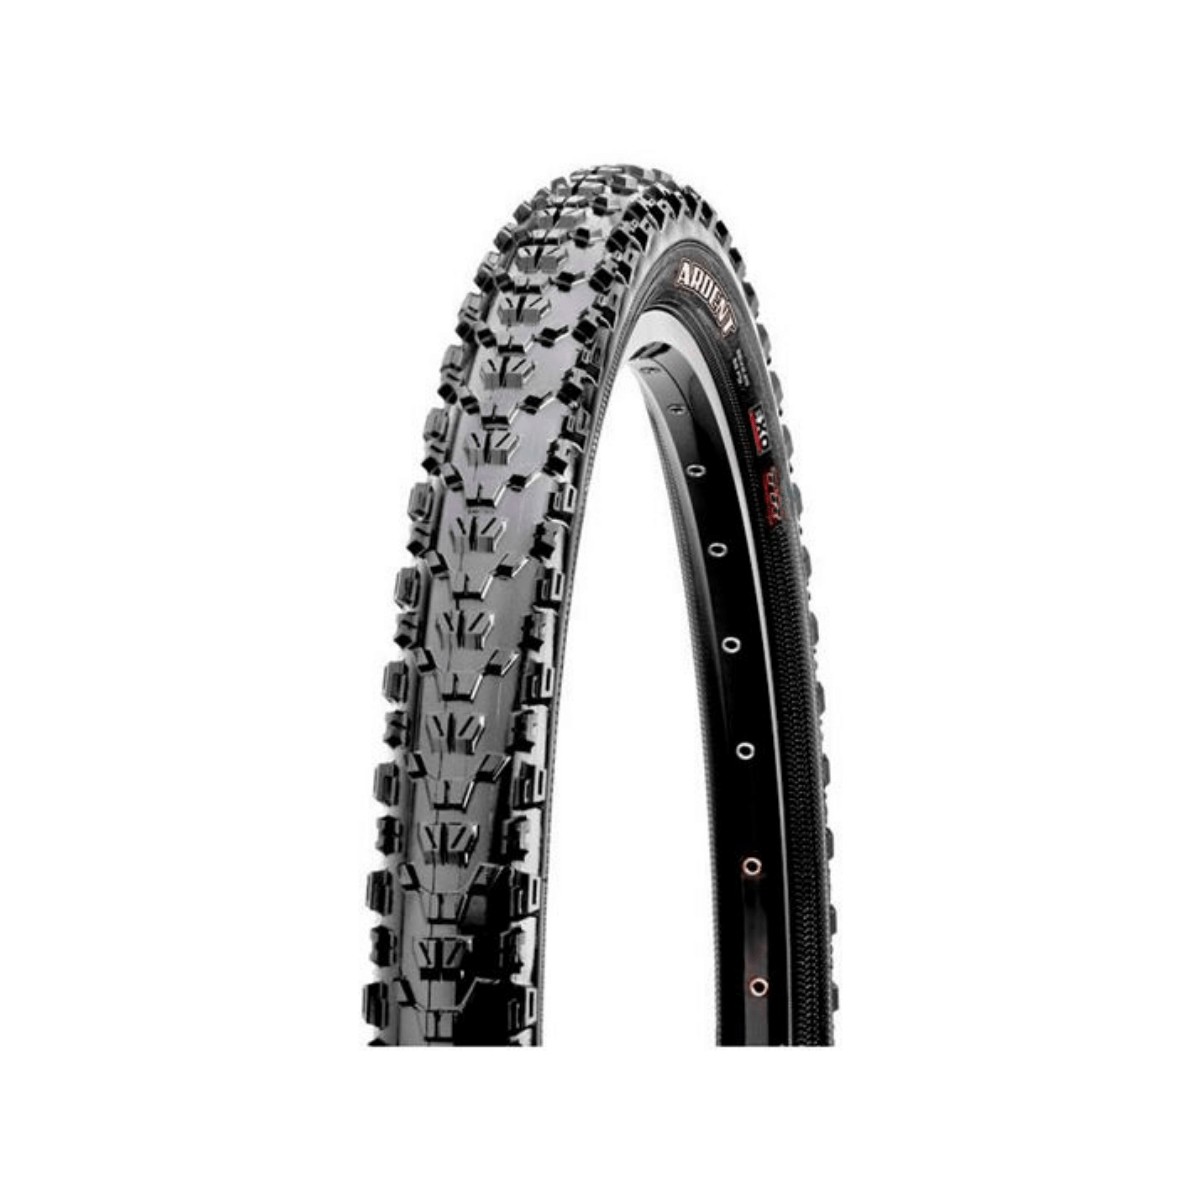 Maxxis Ardent 29X2.25 EXO Tubeless Ready Tire